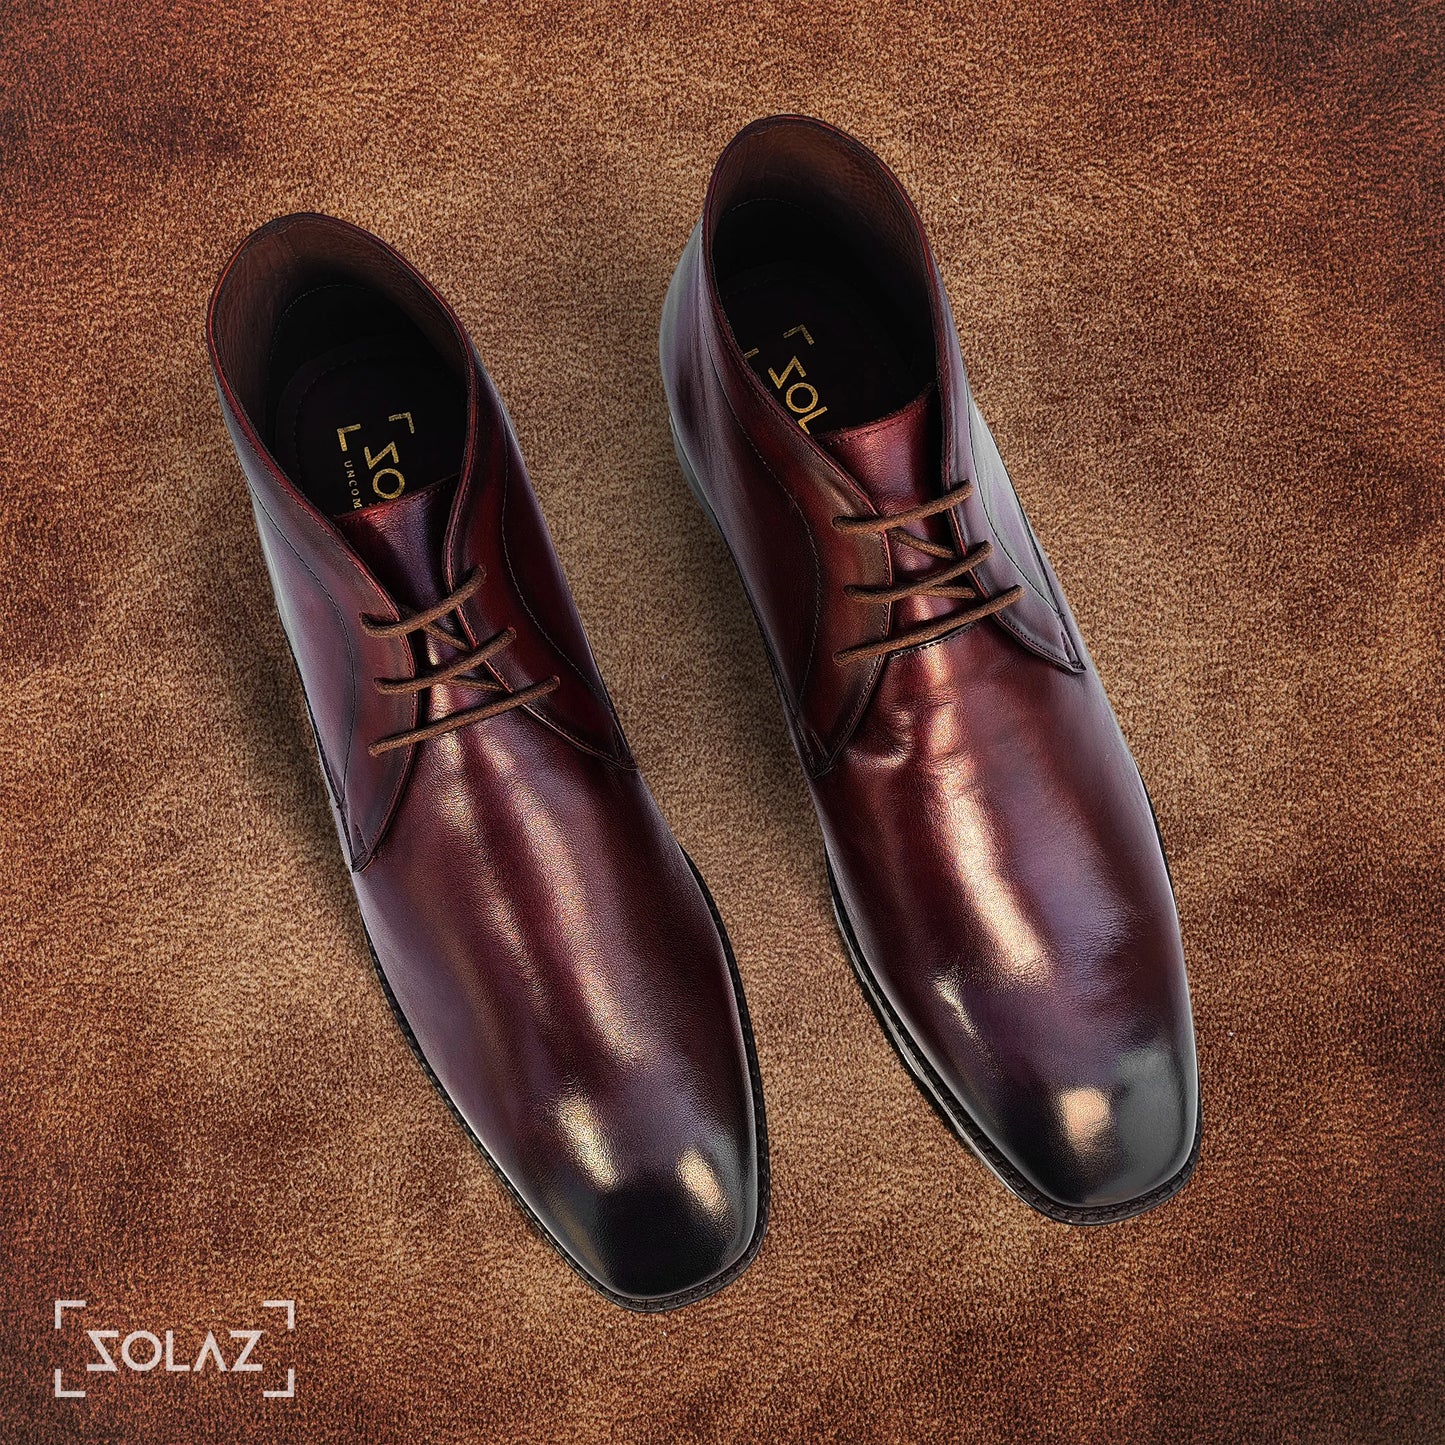 Premium Real Leather Solaz Chukka Boots for Men